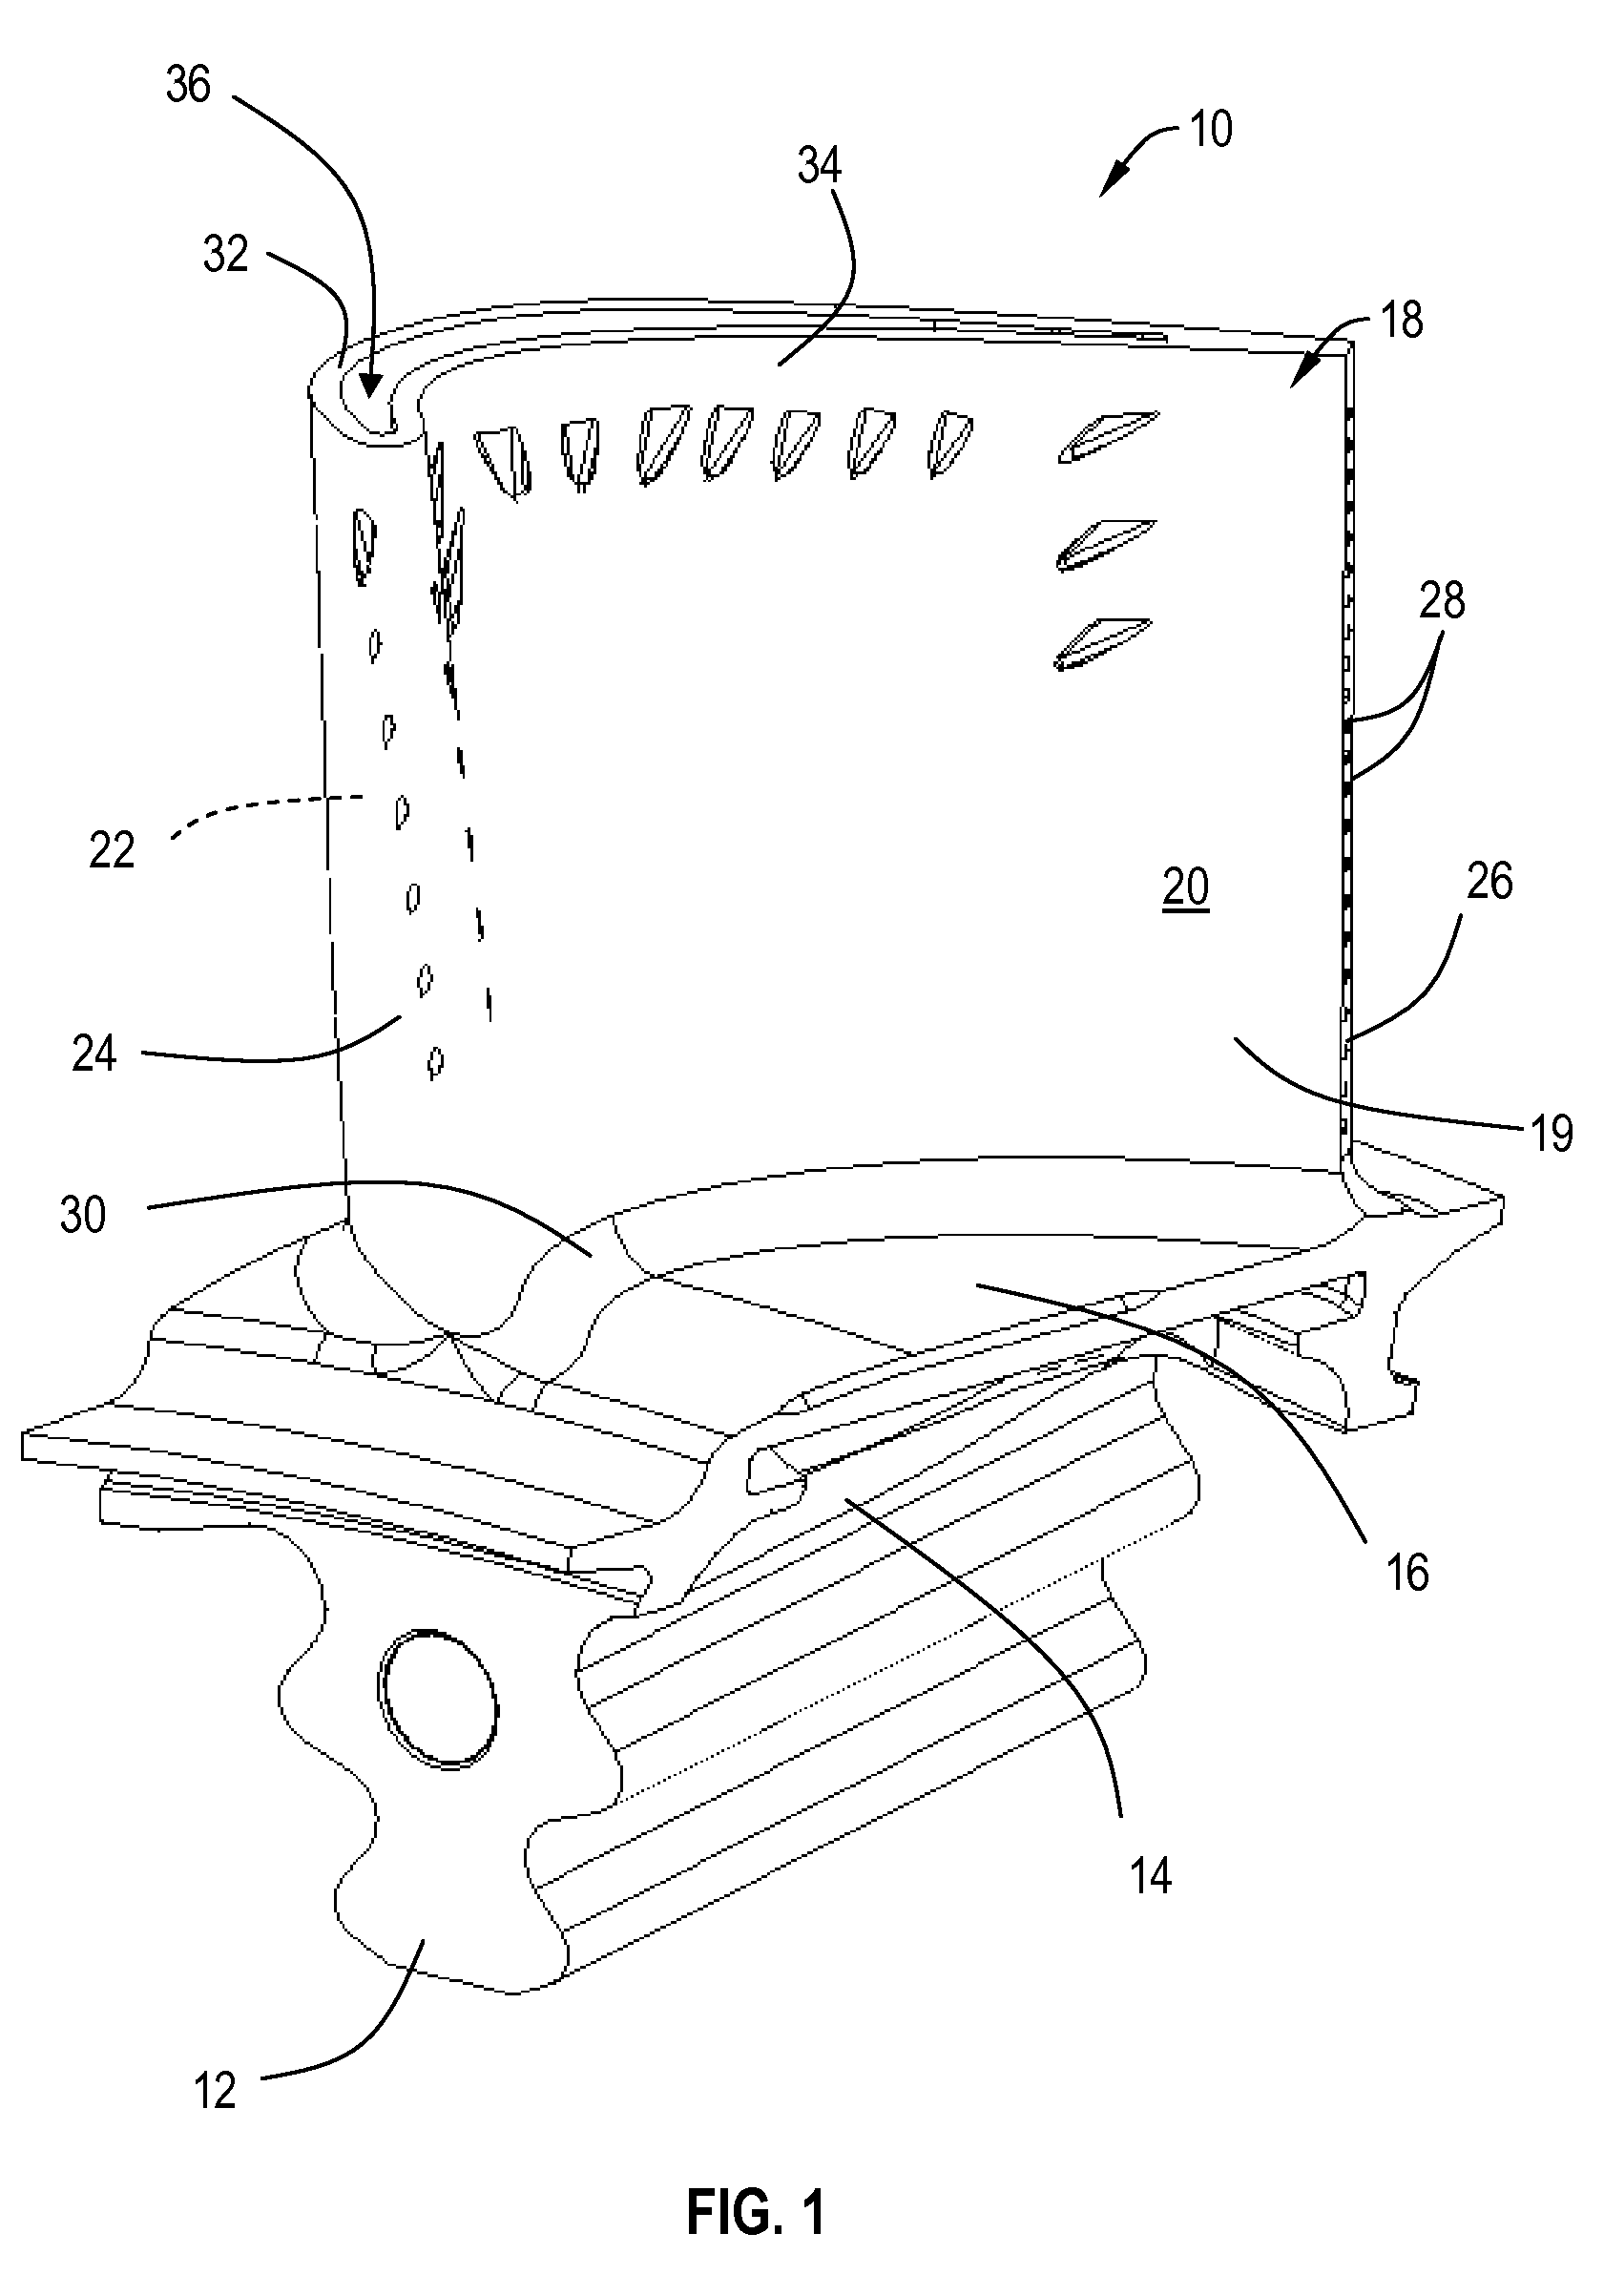 Method of fabricating turbine airfoils and tip structures therefor